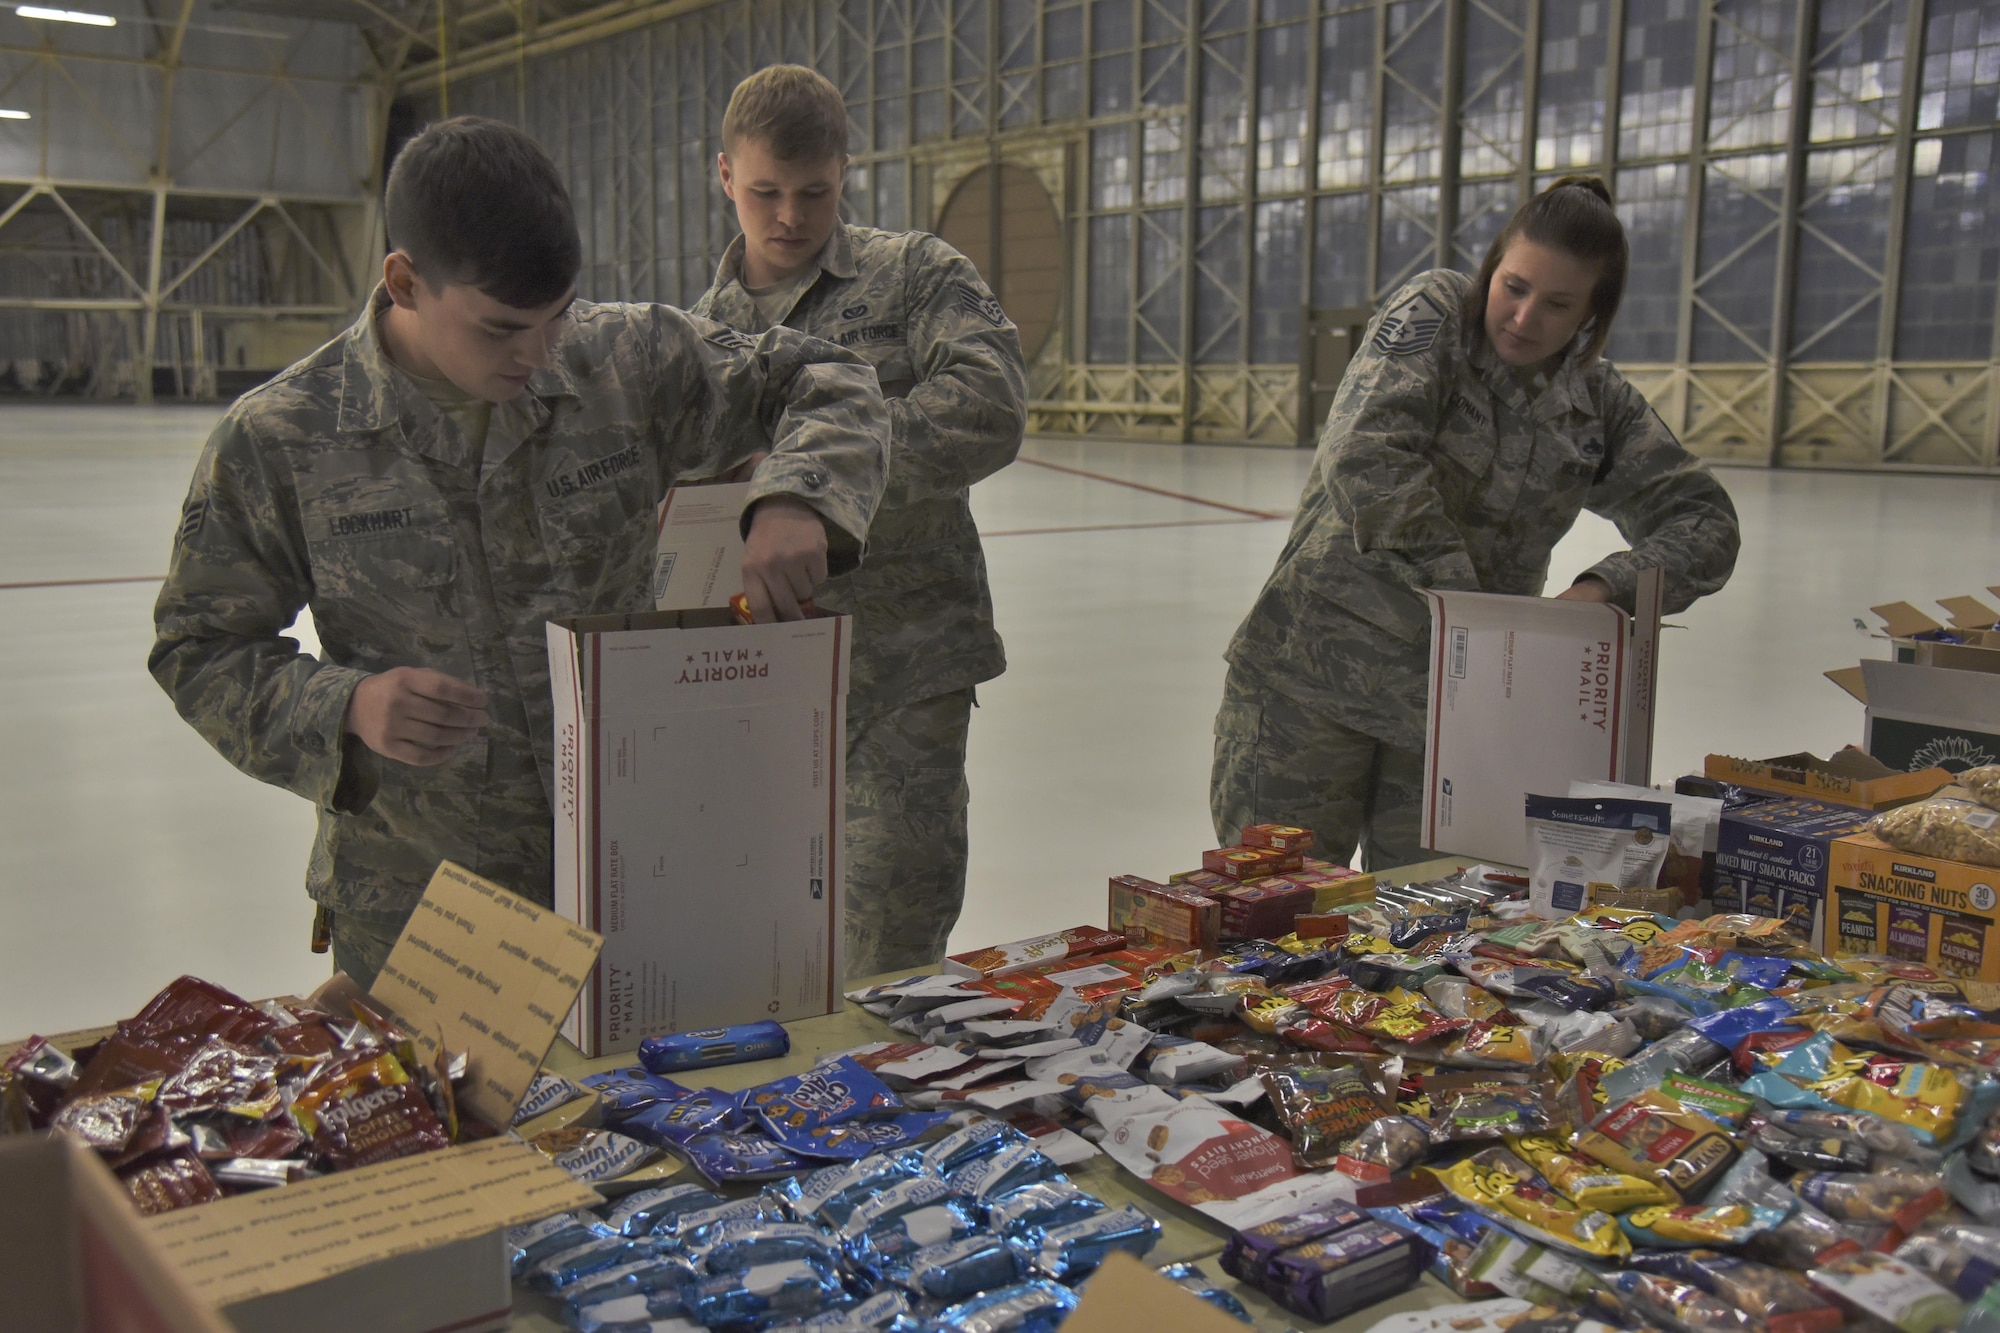 Team Fairchild volunteers pack Treats 2 Troops care packages with donated snacks Nov. 29, 2017, at Fairchild Air Force Base, Washington. KREM 2 News partnered with Team Fairchild for the seventh year in a row to fill care packages with small treats and gifts to help benefit military members serving overseas during the holiday season. (U.S. Air Force photo/Senior Airman Mackenzie Richardson)